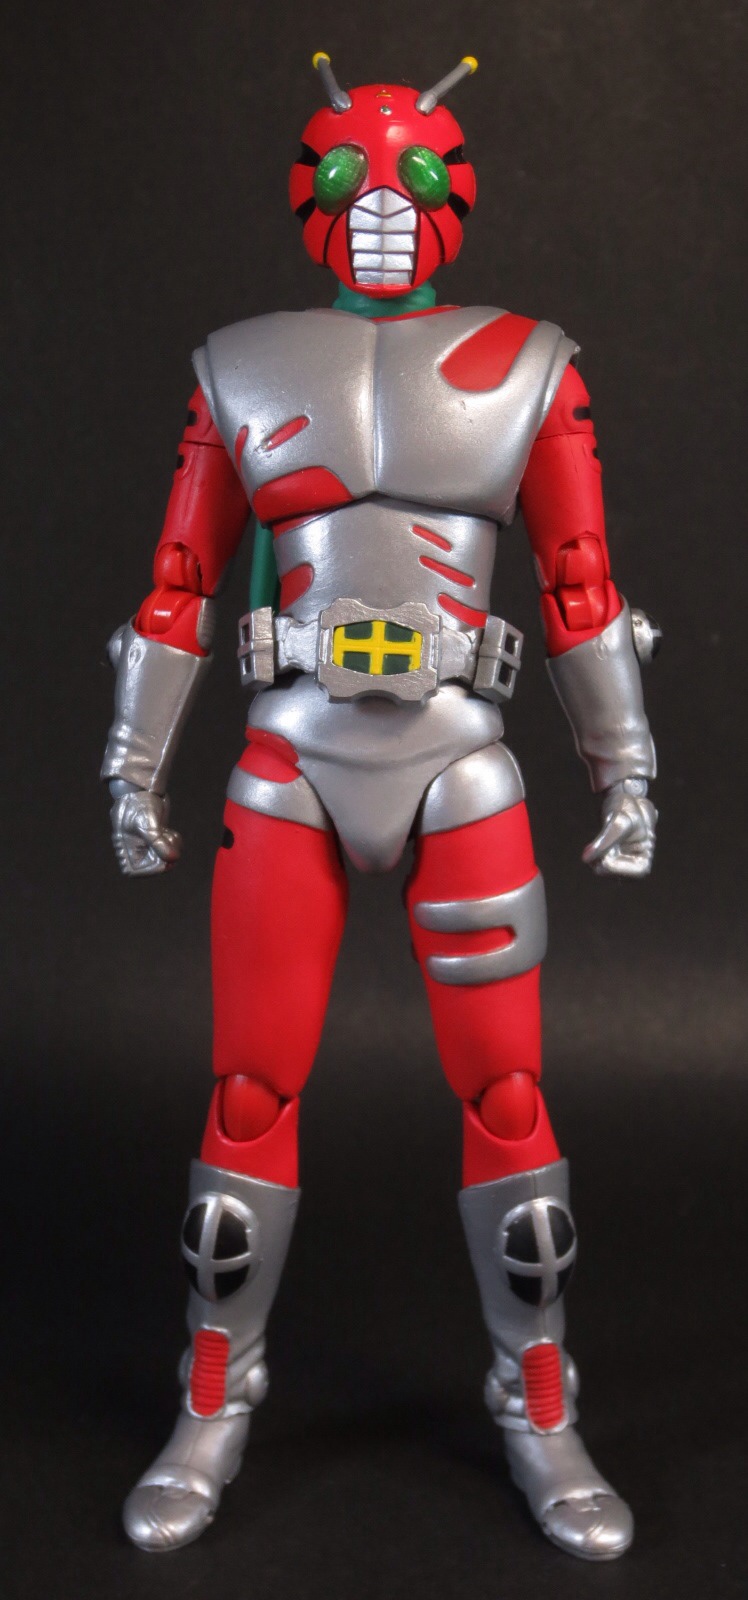 In Hand Images of SH Figuarts Kamen Rider ZX - Tokunation